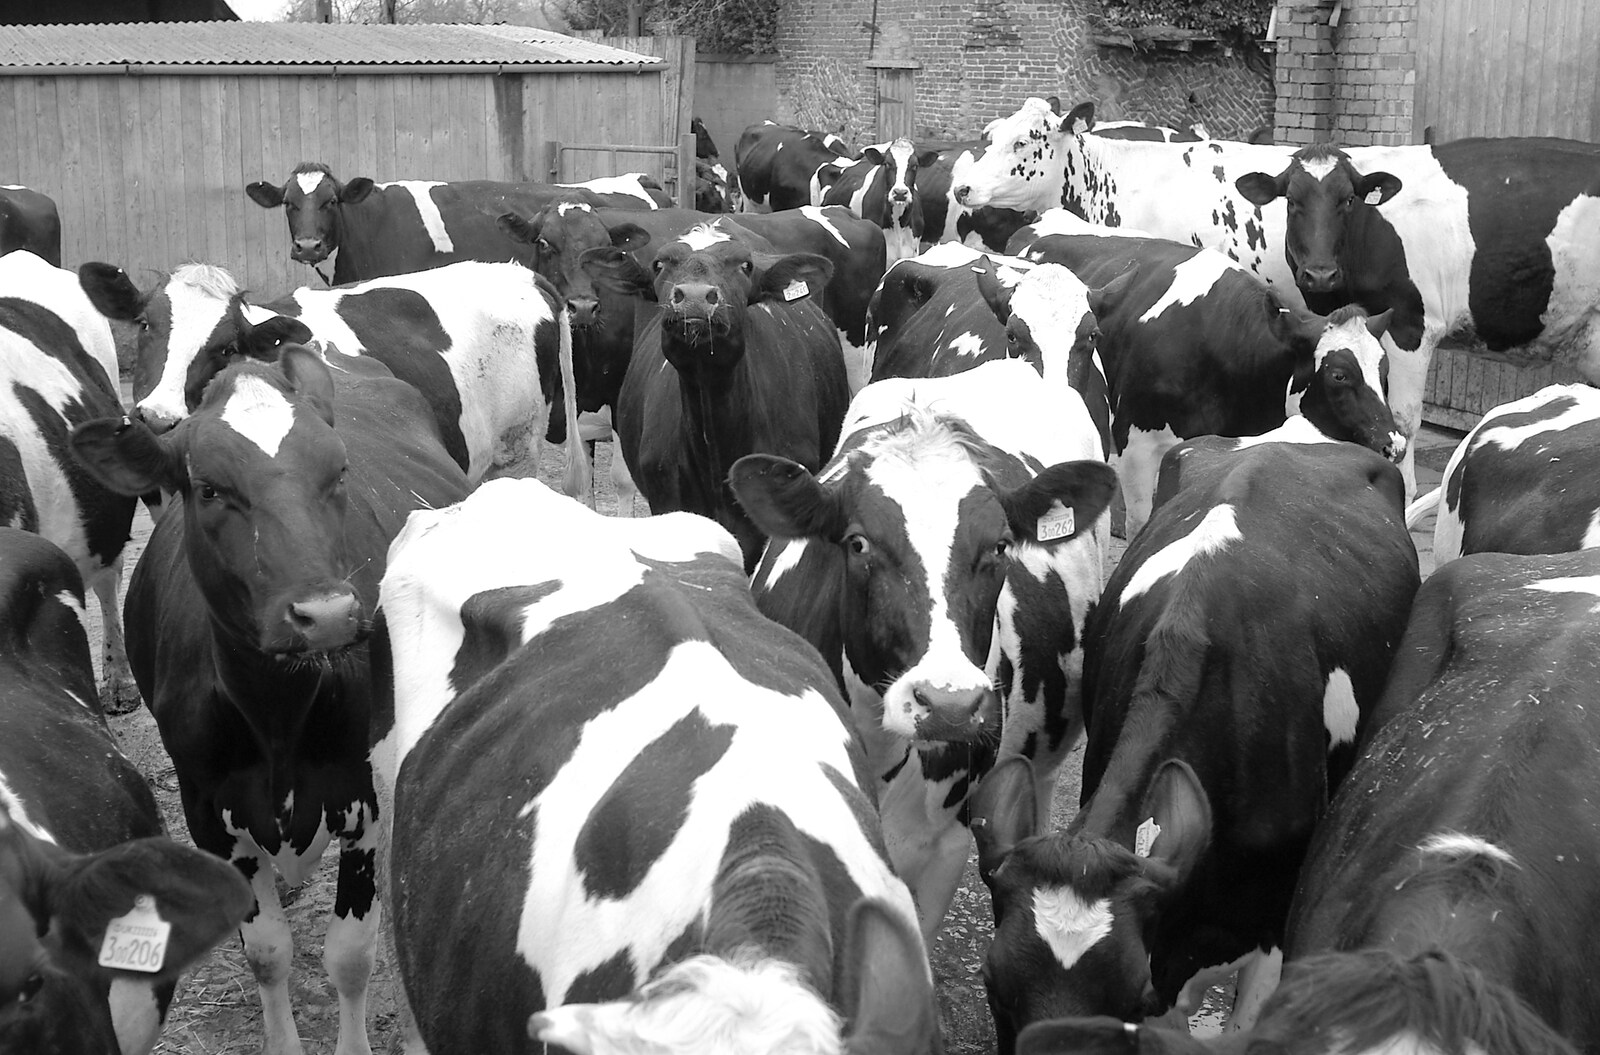 A herd of Fresians mill around in the yard from Wavy and the Milking Room, Dairy Farm, Thrandeston, Suffolk - 28th March 2005